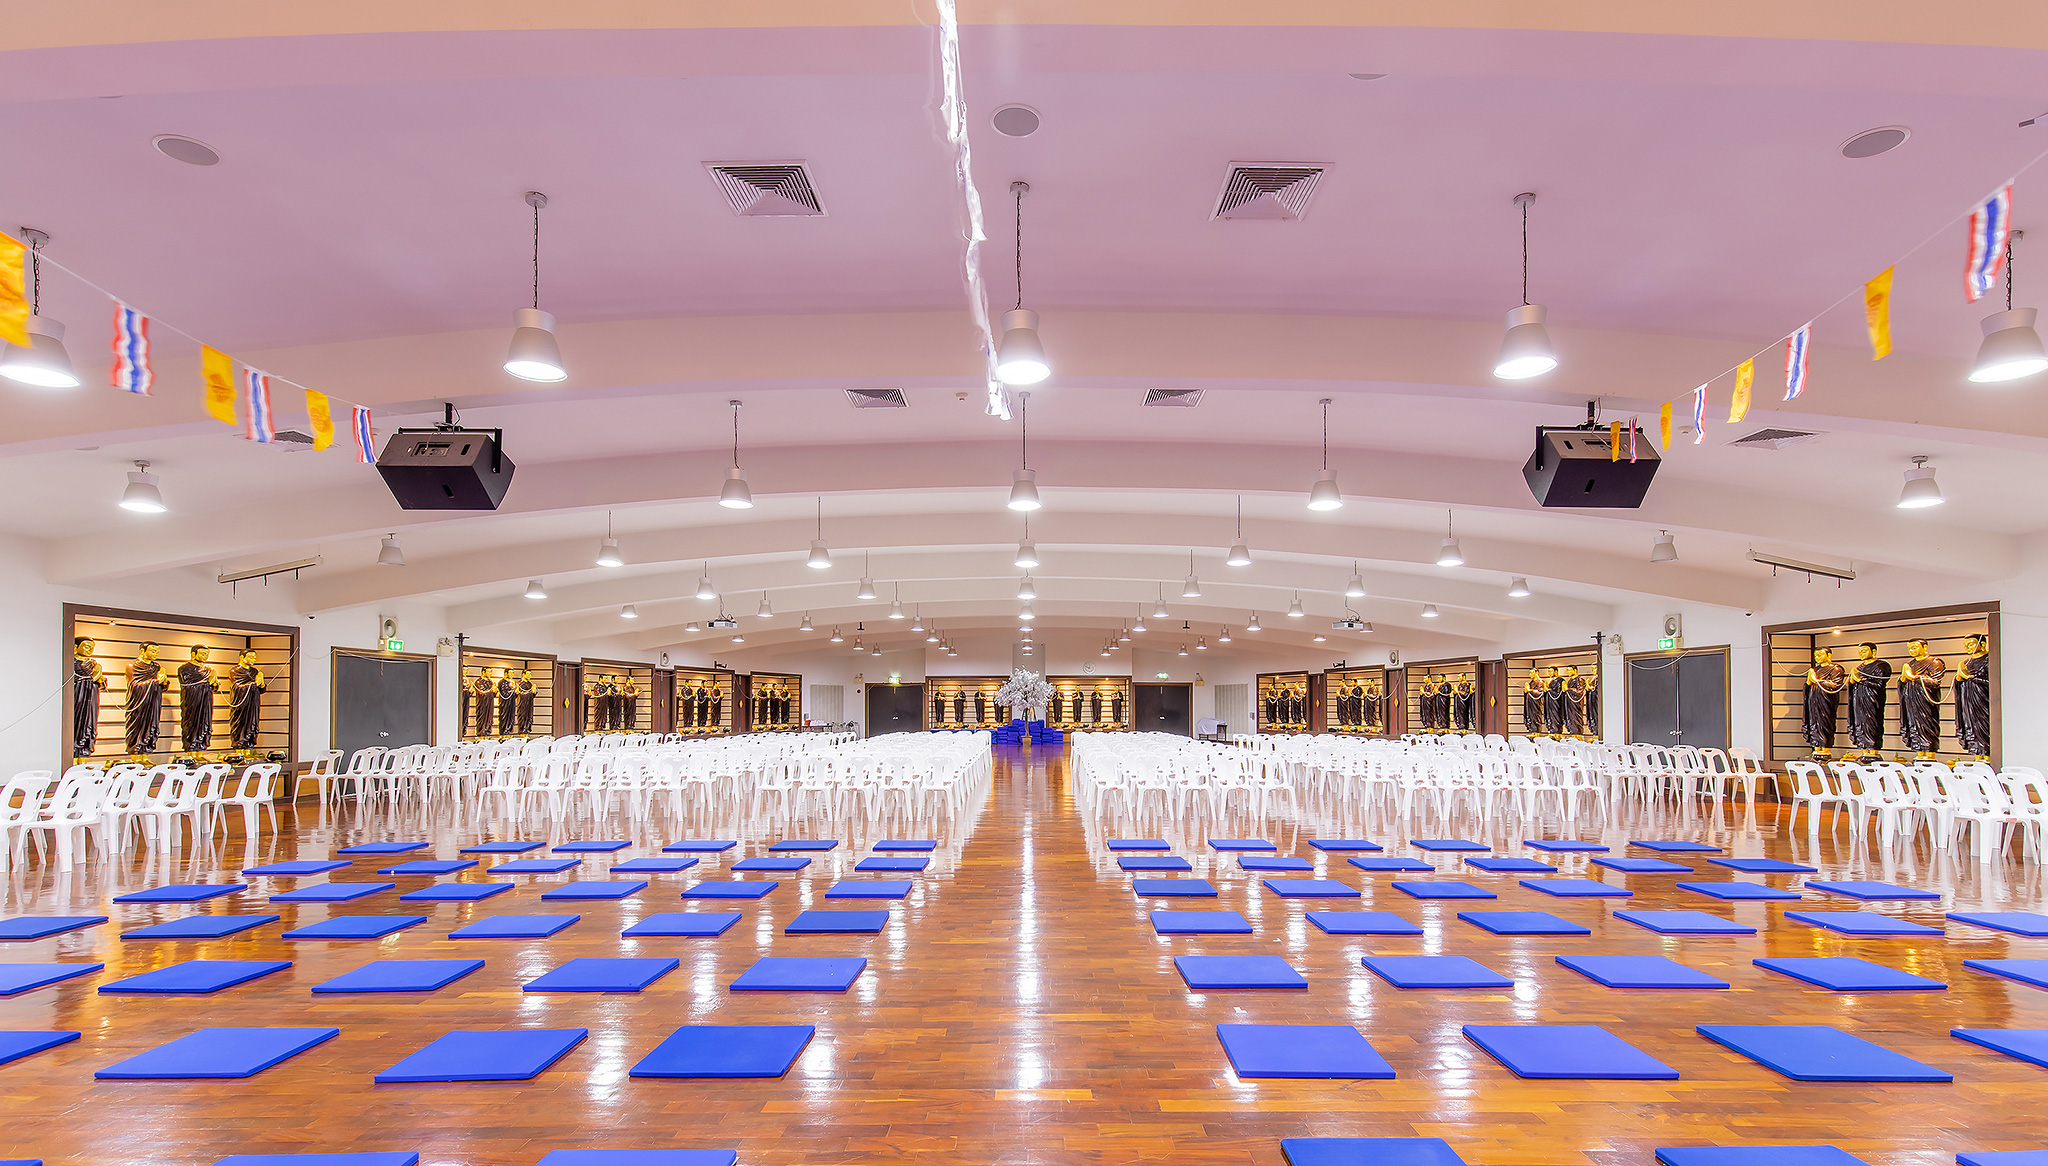 Young Buddhists Association of Thailand Equips Dharma Practice Room with Pristine Sound Using Premium HARMAN Professional Audio Solution